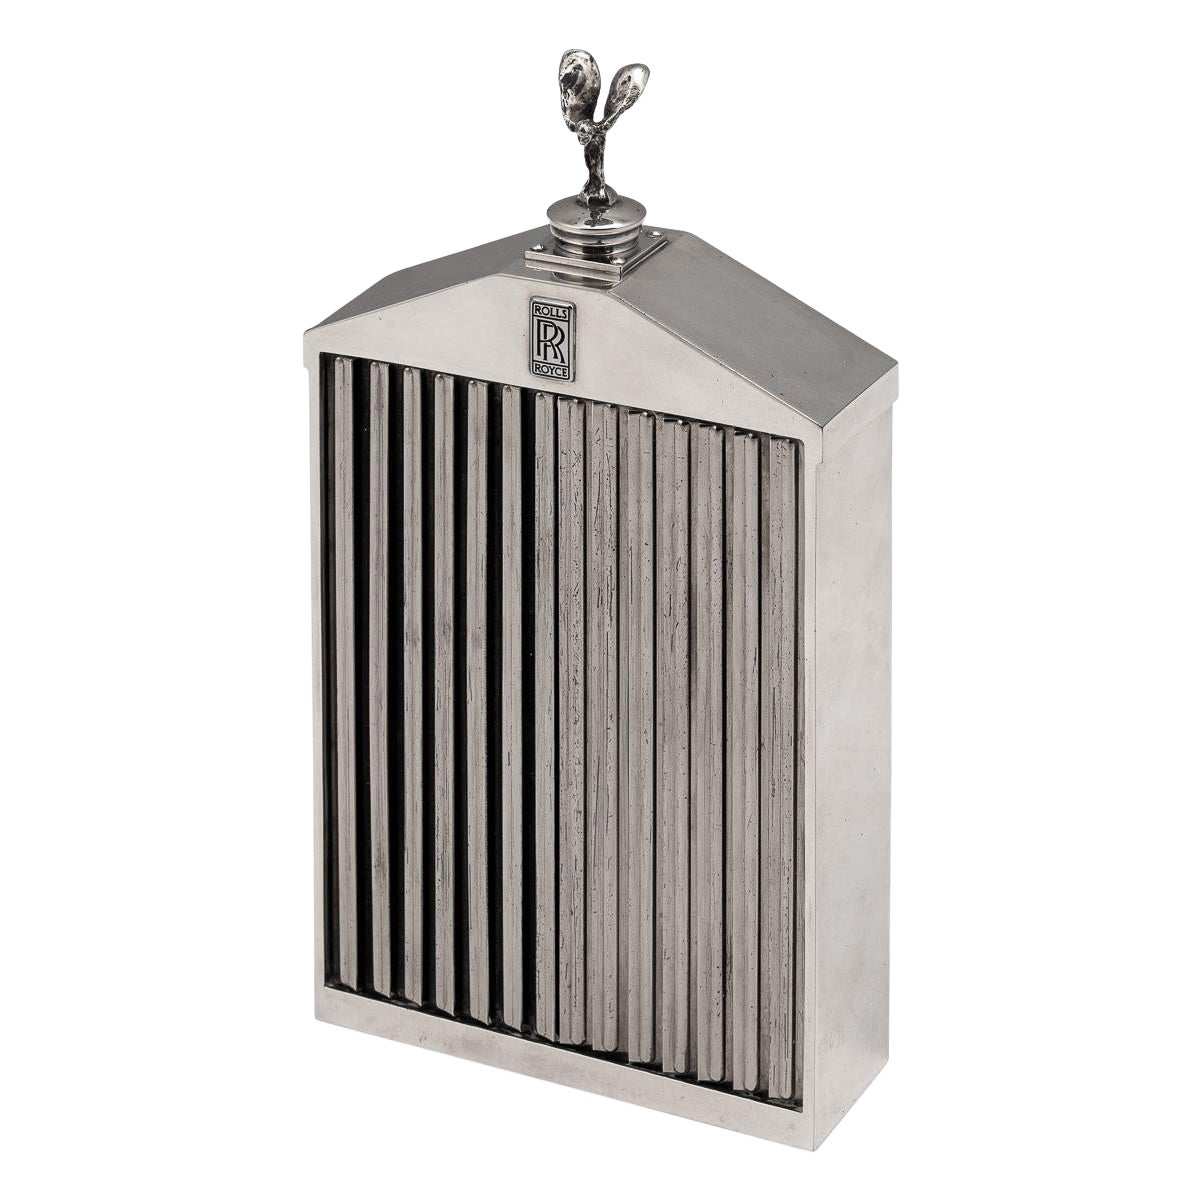 20th Century Rolls Royce Radiator Grille Decanter, By Classic Stable, England